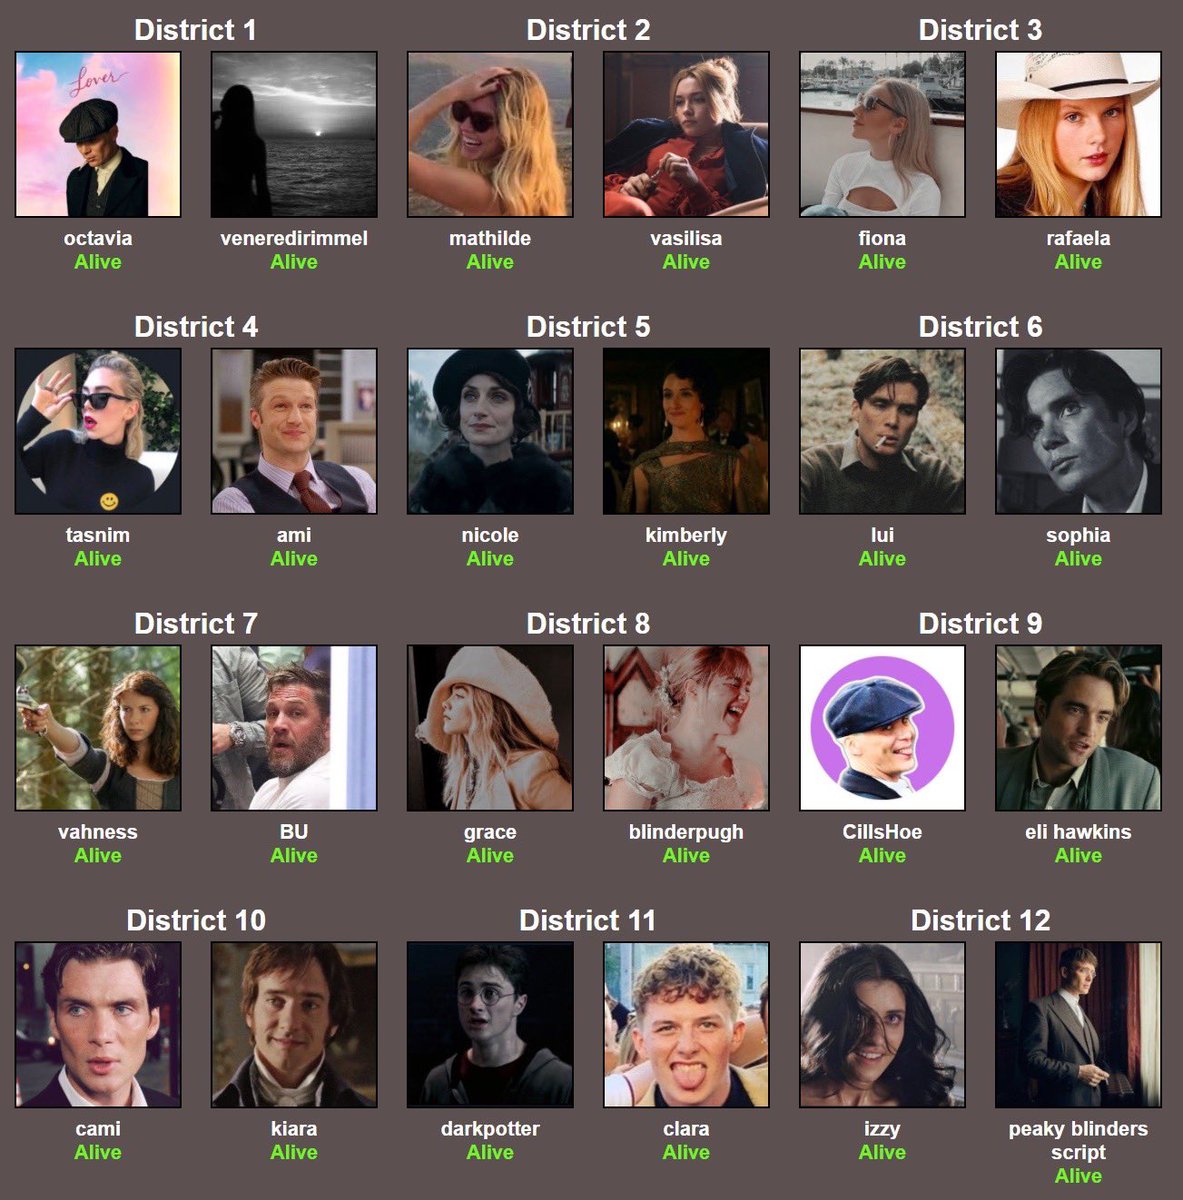 i got bored and decided to start the hunger games between my mutuals (still crying that i couldn’t include everyone, forgive me)personally i want peaky blinders script account to murder us all